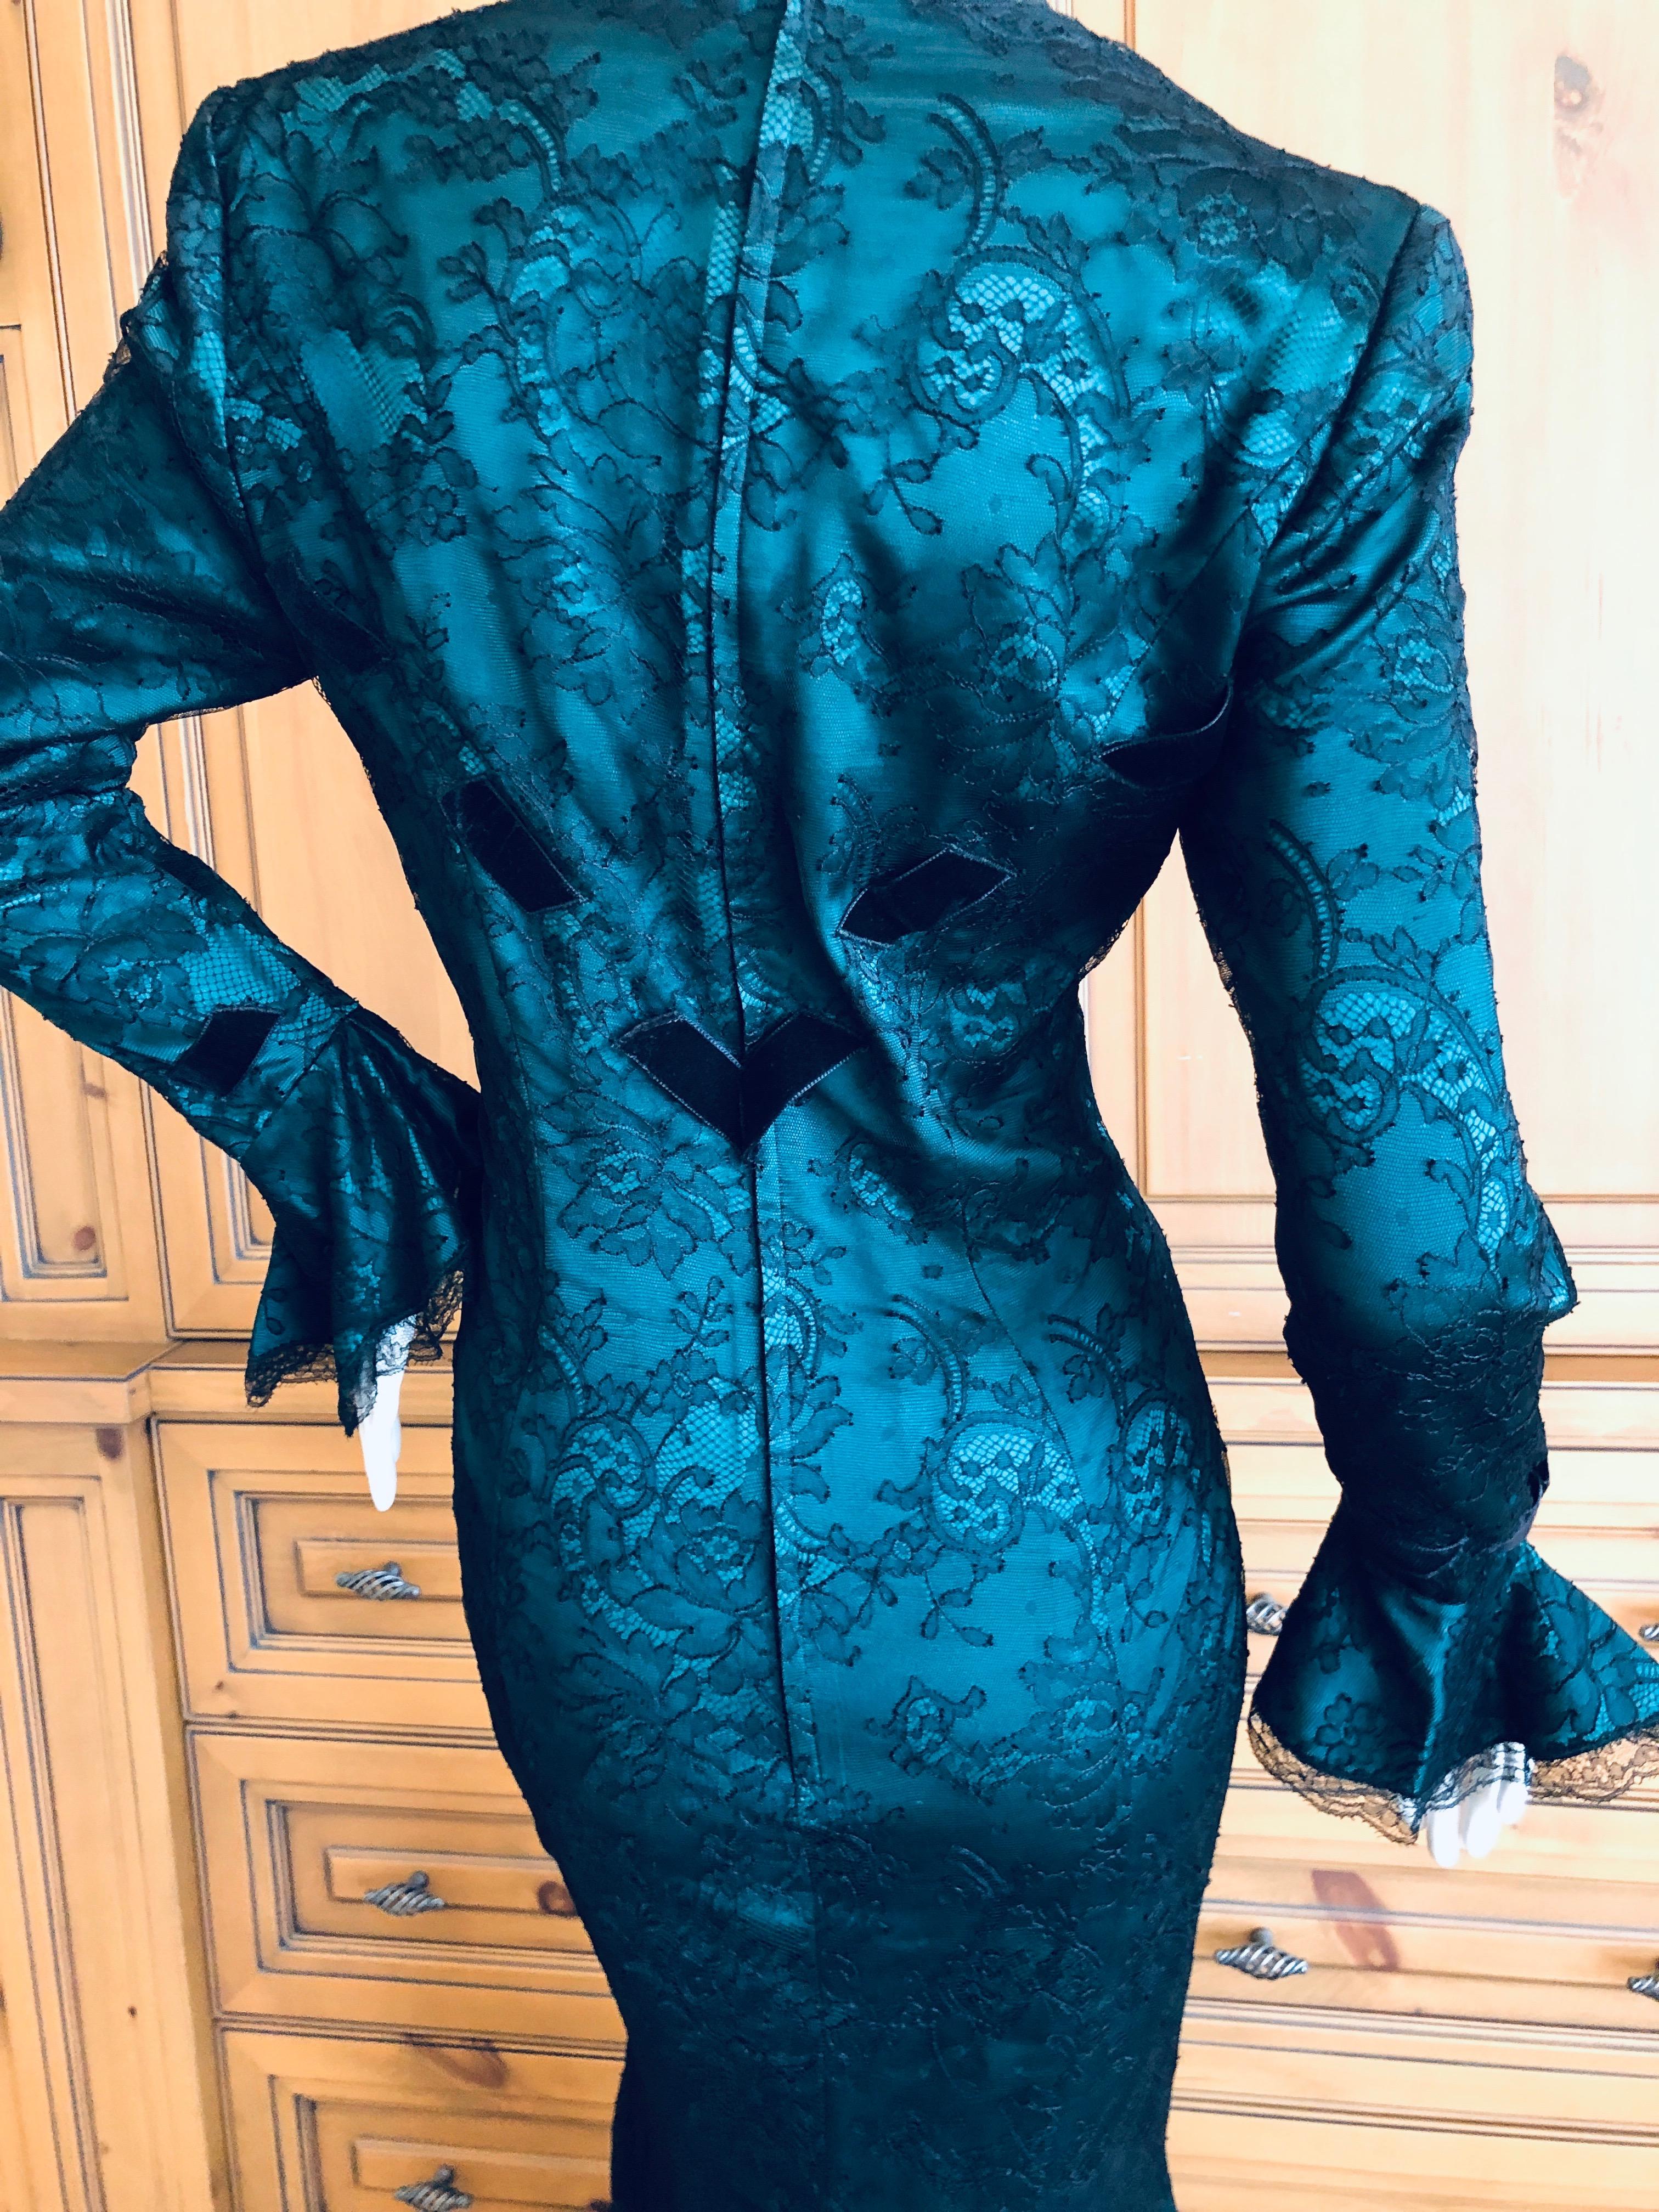 Thierry Mugler Green Vintage 80's Evening Dress with Black Lace Overlay For Sale 5